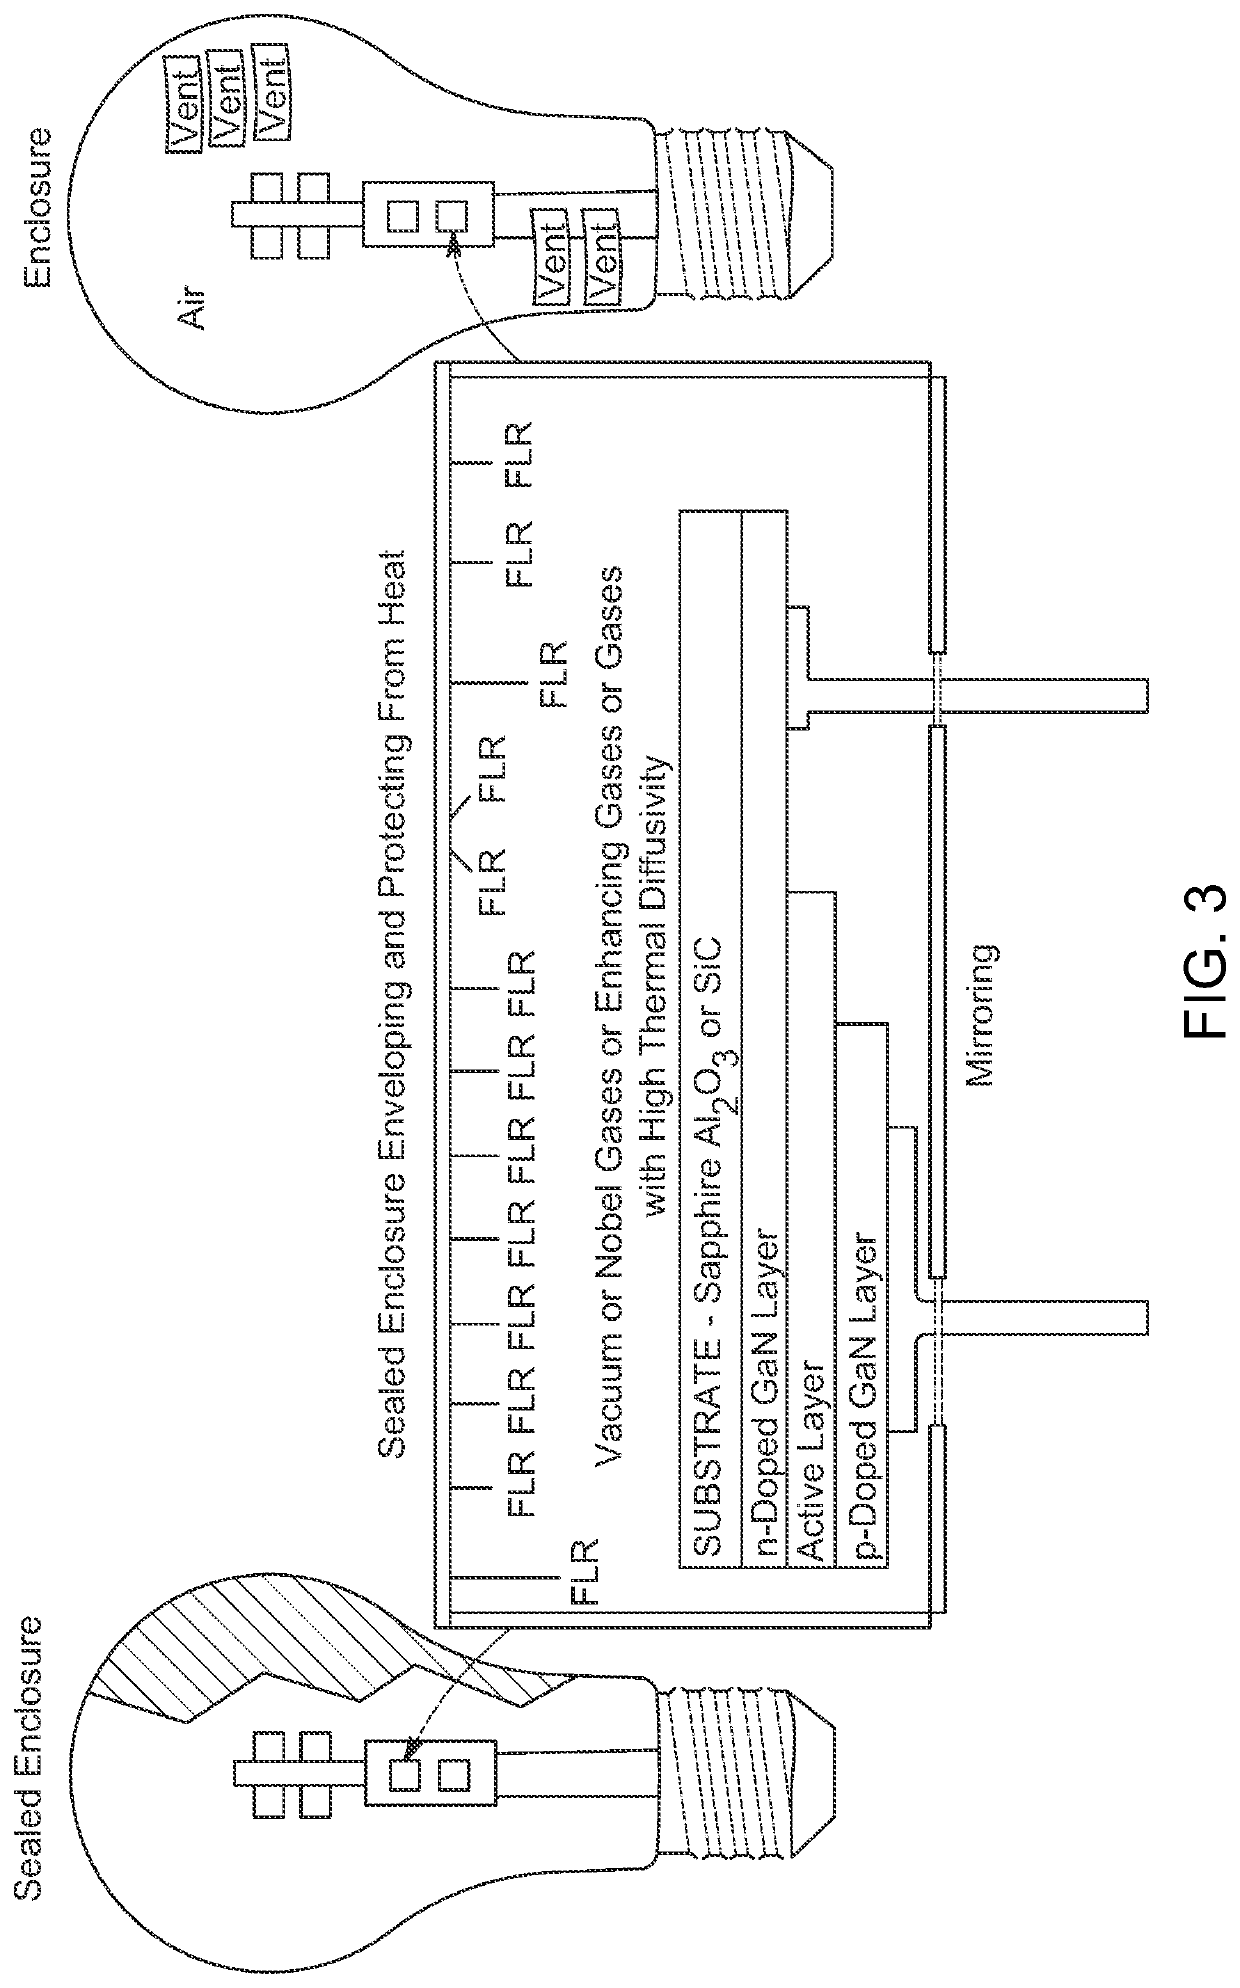 Enclosures with light emitting diodes within